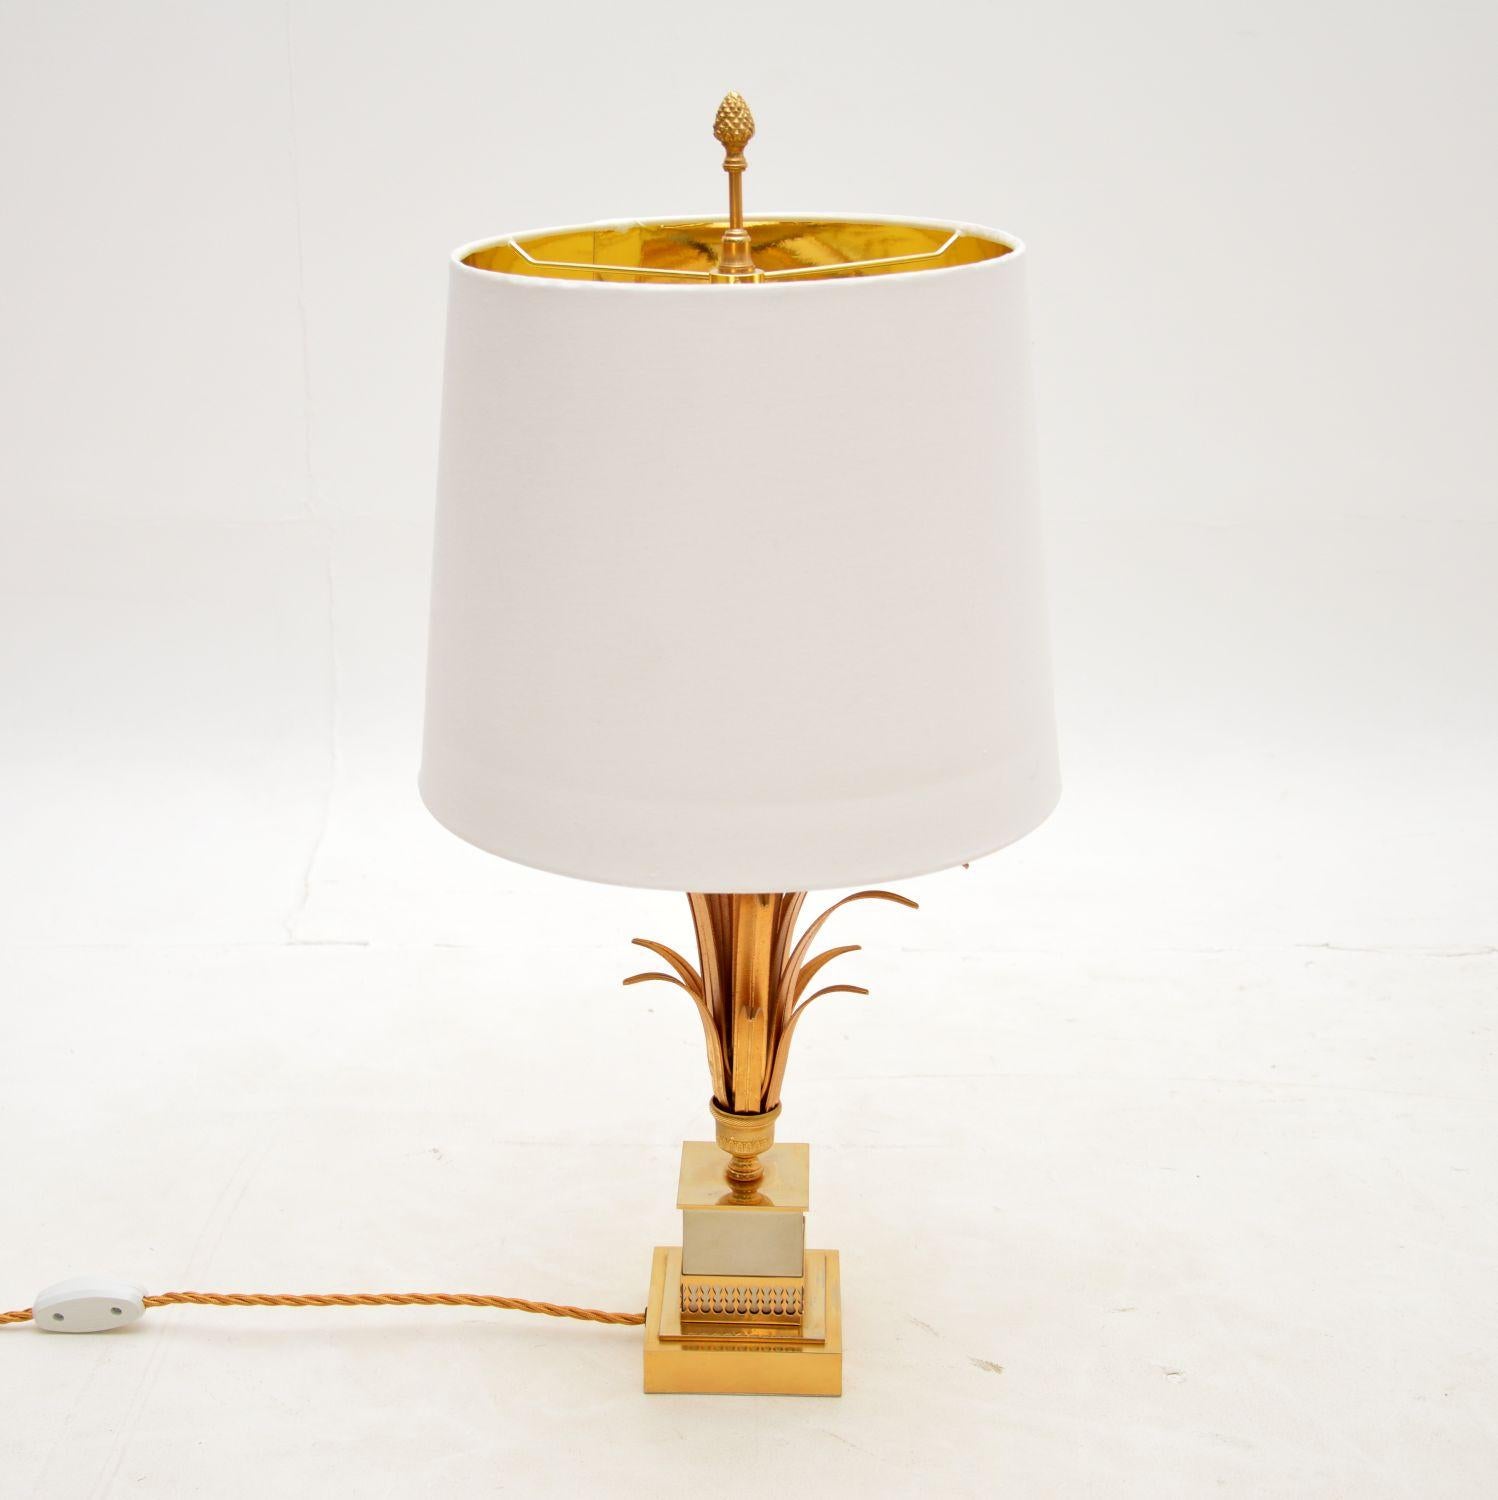 A beautiful original vintage brass table lamp, made in France around the 1960s.

This is of amazing quality and has an absolutely gorgeous design. It is finished in brass and chrome, with an urn shaped base, splayed reeds leaves and an acorn